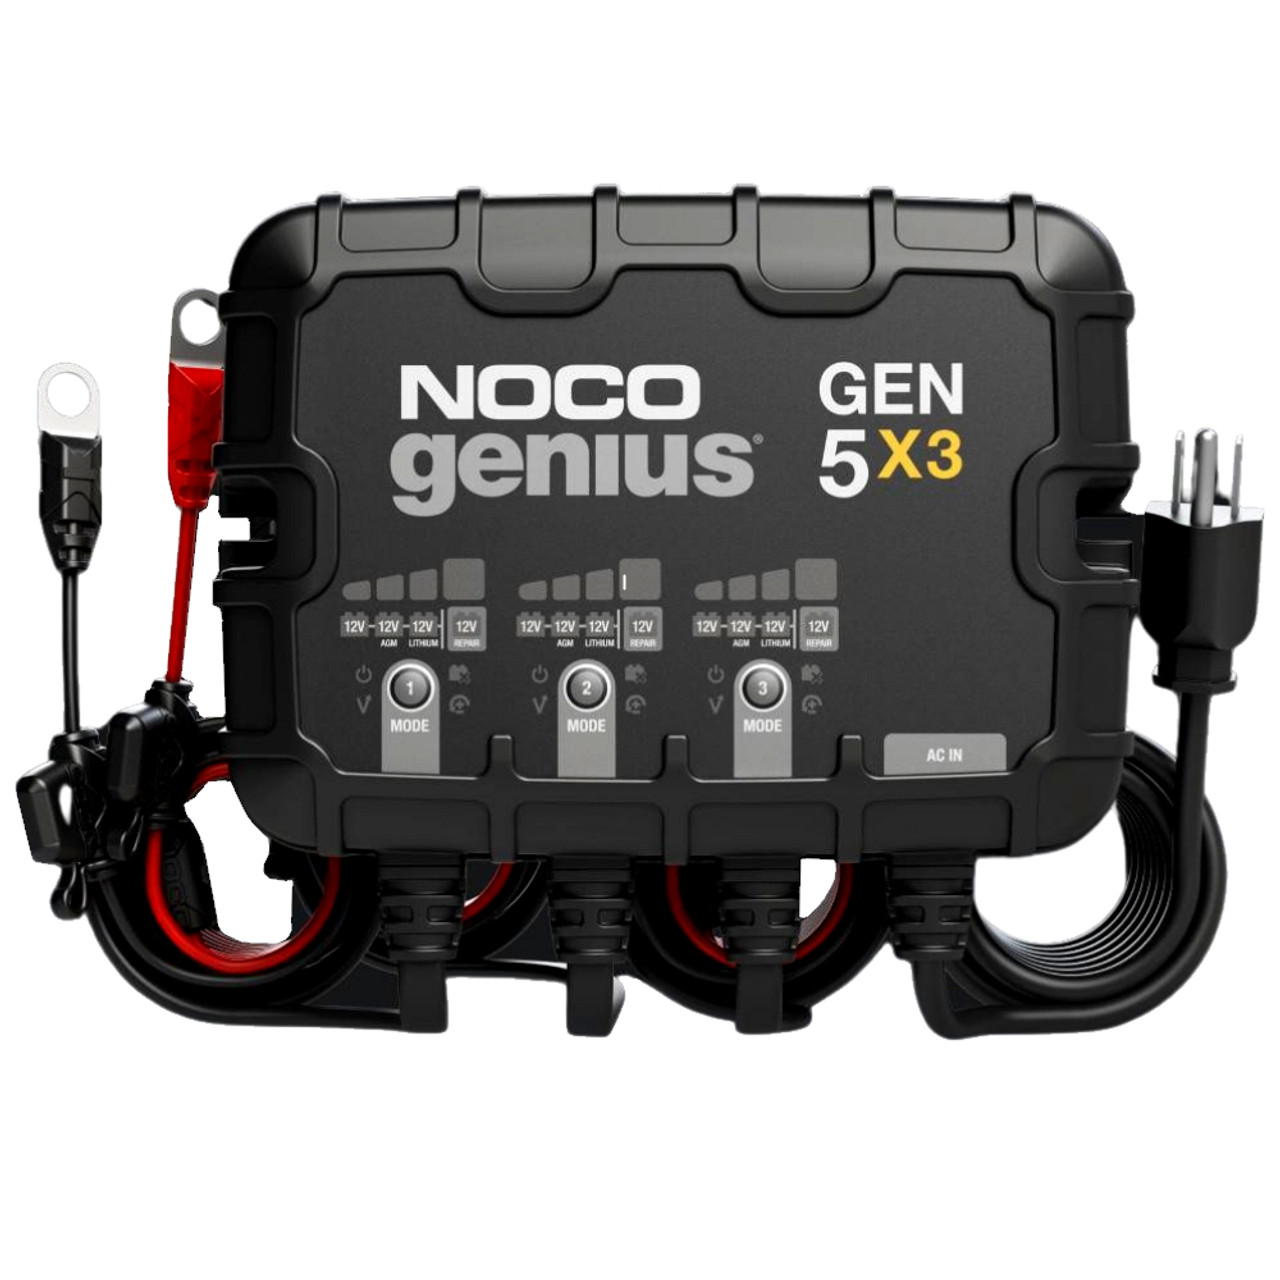 NOCO GEN5X3 12V 3-Bank 15-Amp On-Board Battery Charger